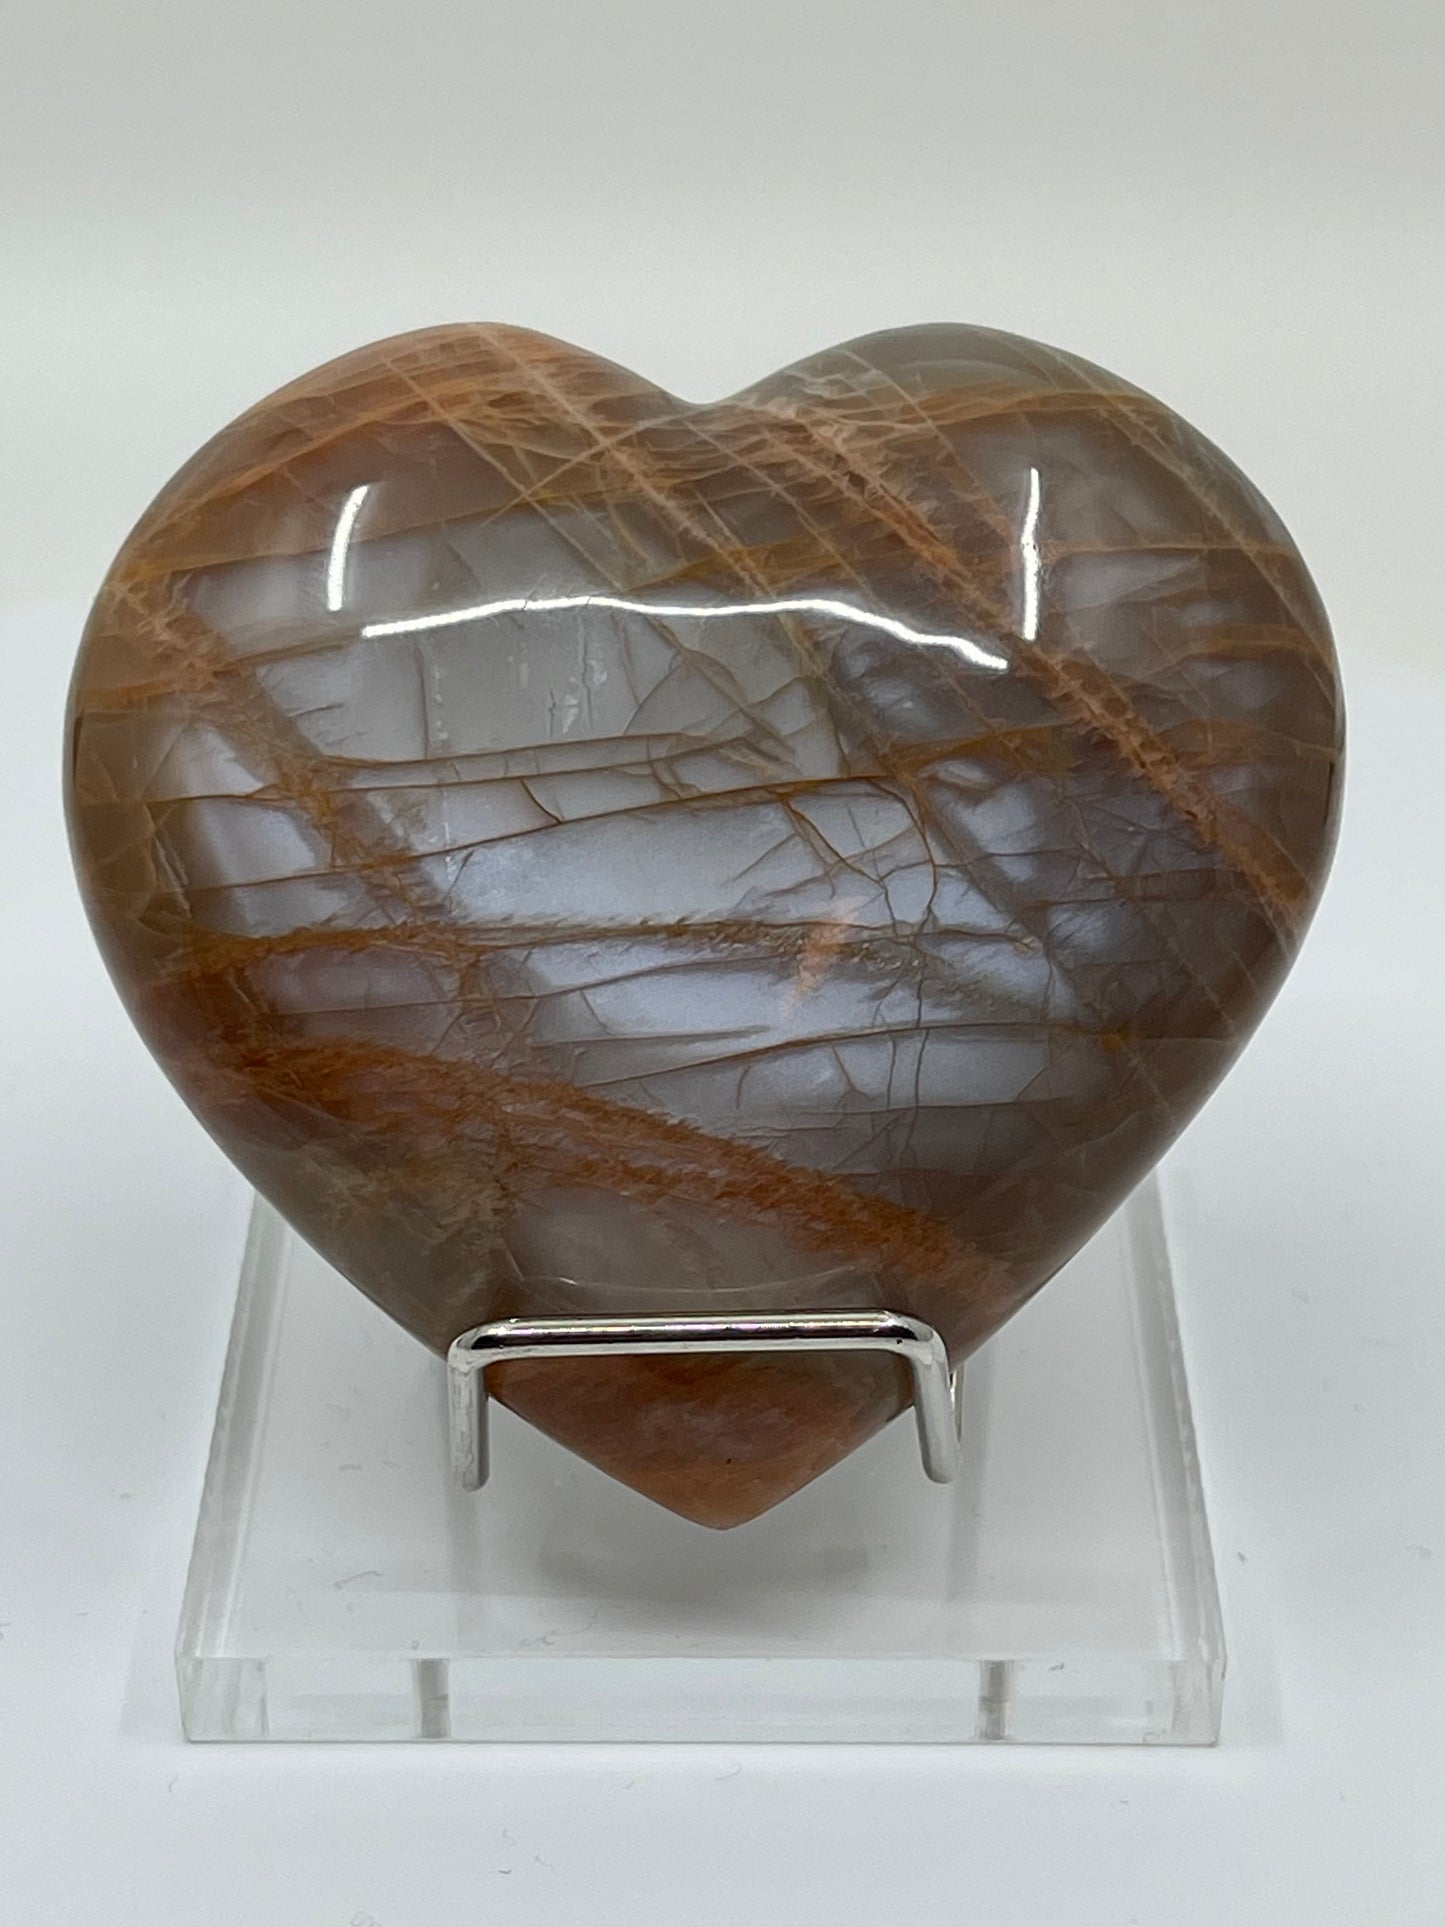 Peach Moonstone Puffy Heart Carving